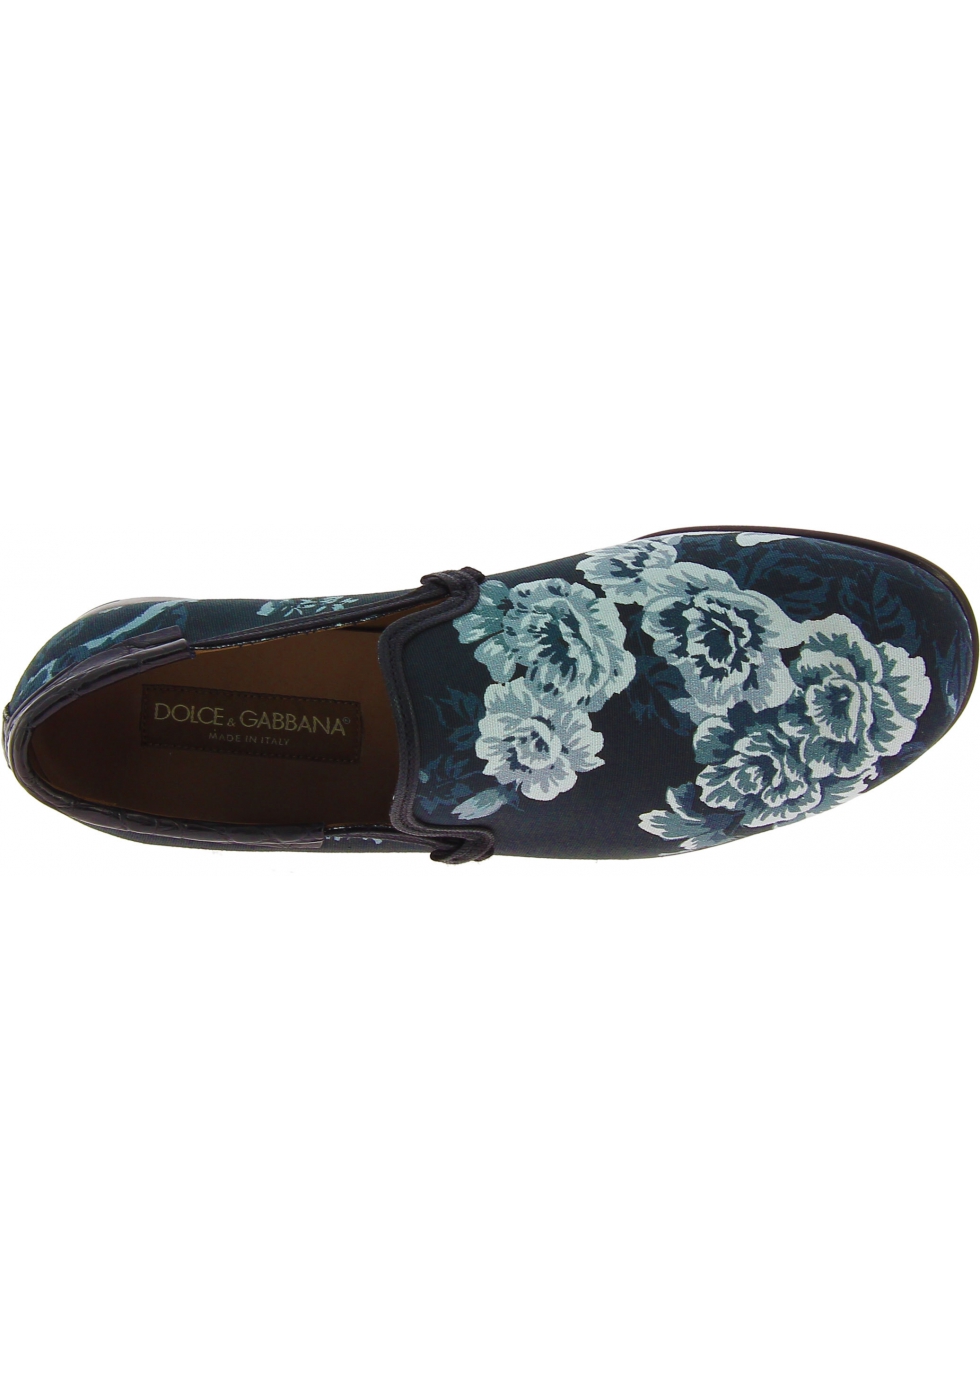 Dolce&Gabbana Men's loafers shoes in crocodile printed blue azure ...